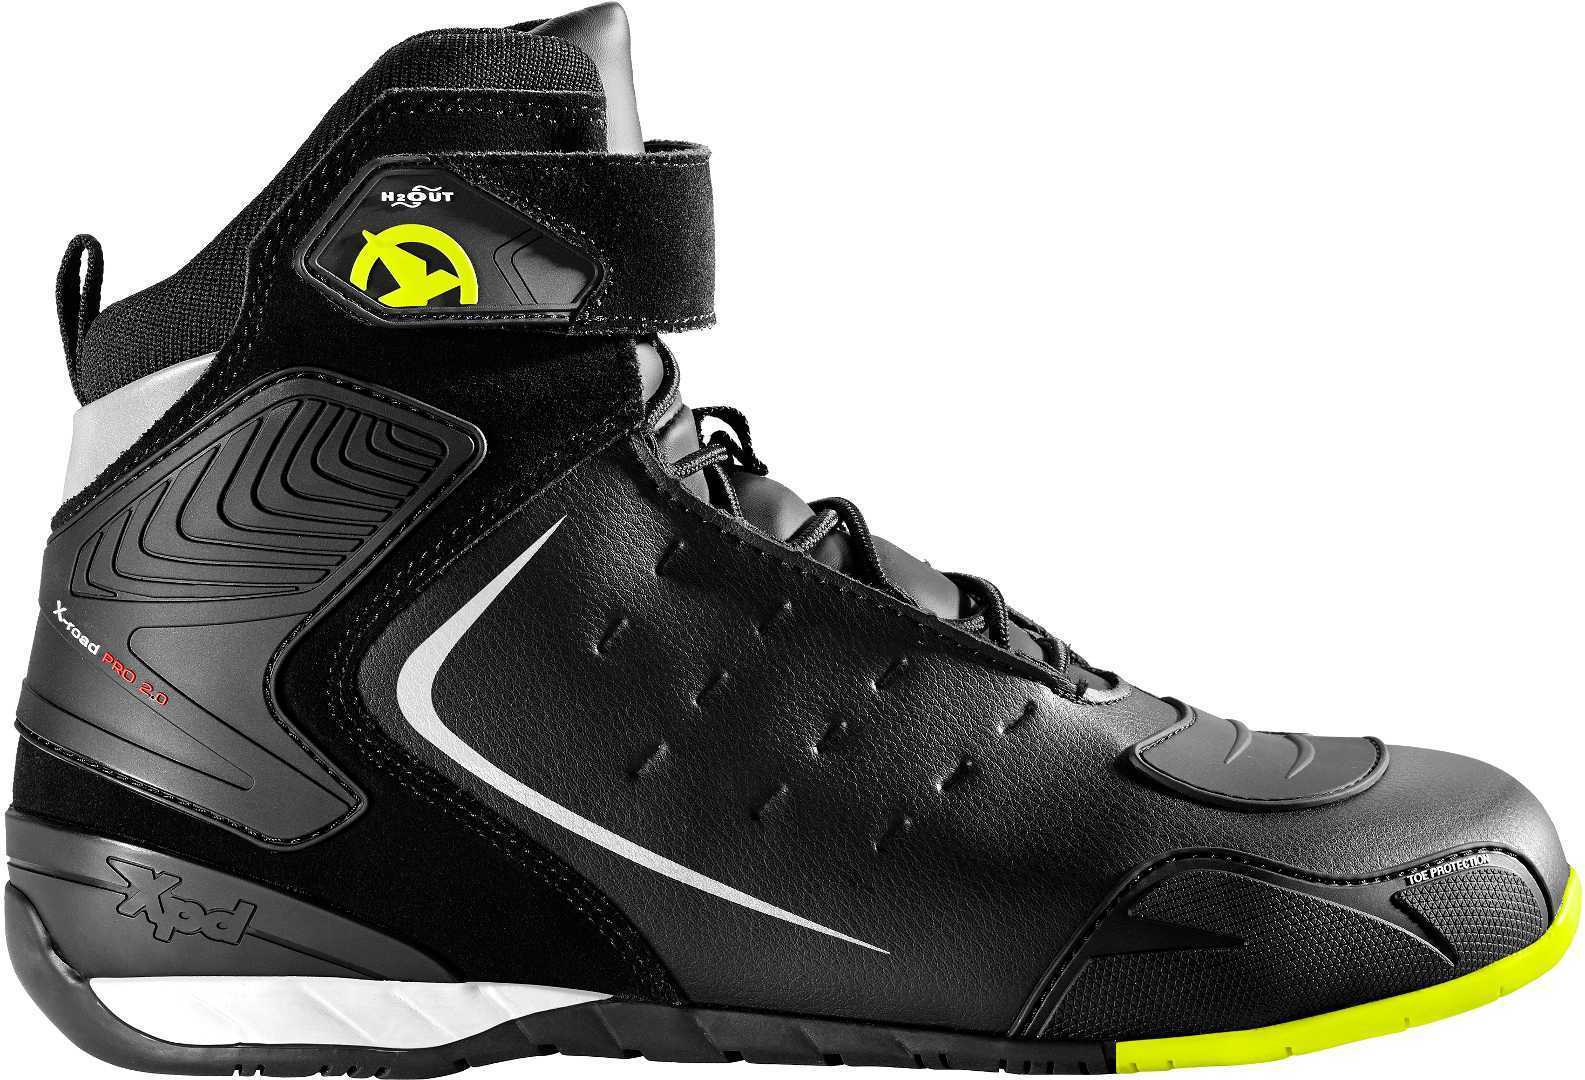 Image of EU XPD X-Road H2Out Jaune Fluo Chaussures Taille 42